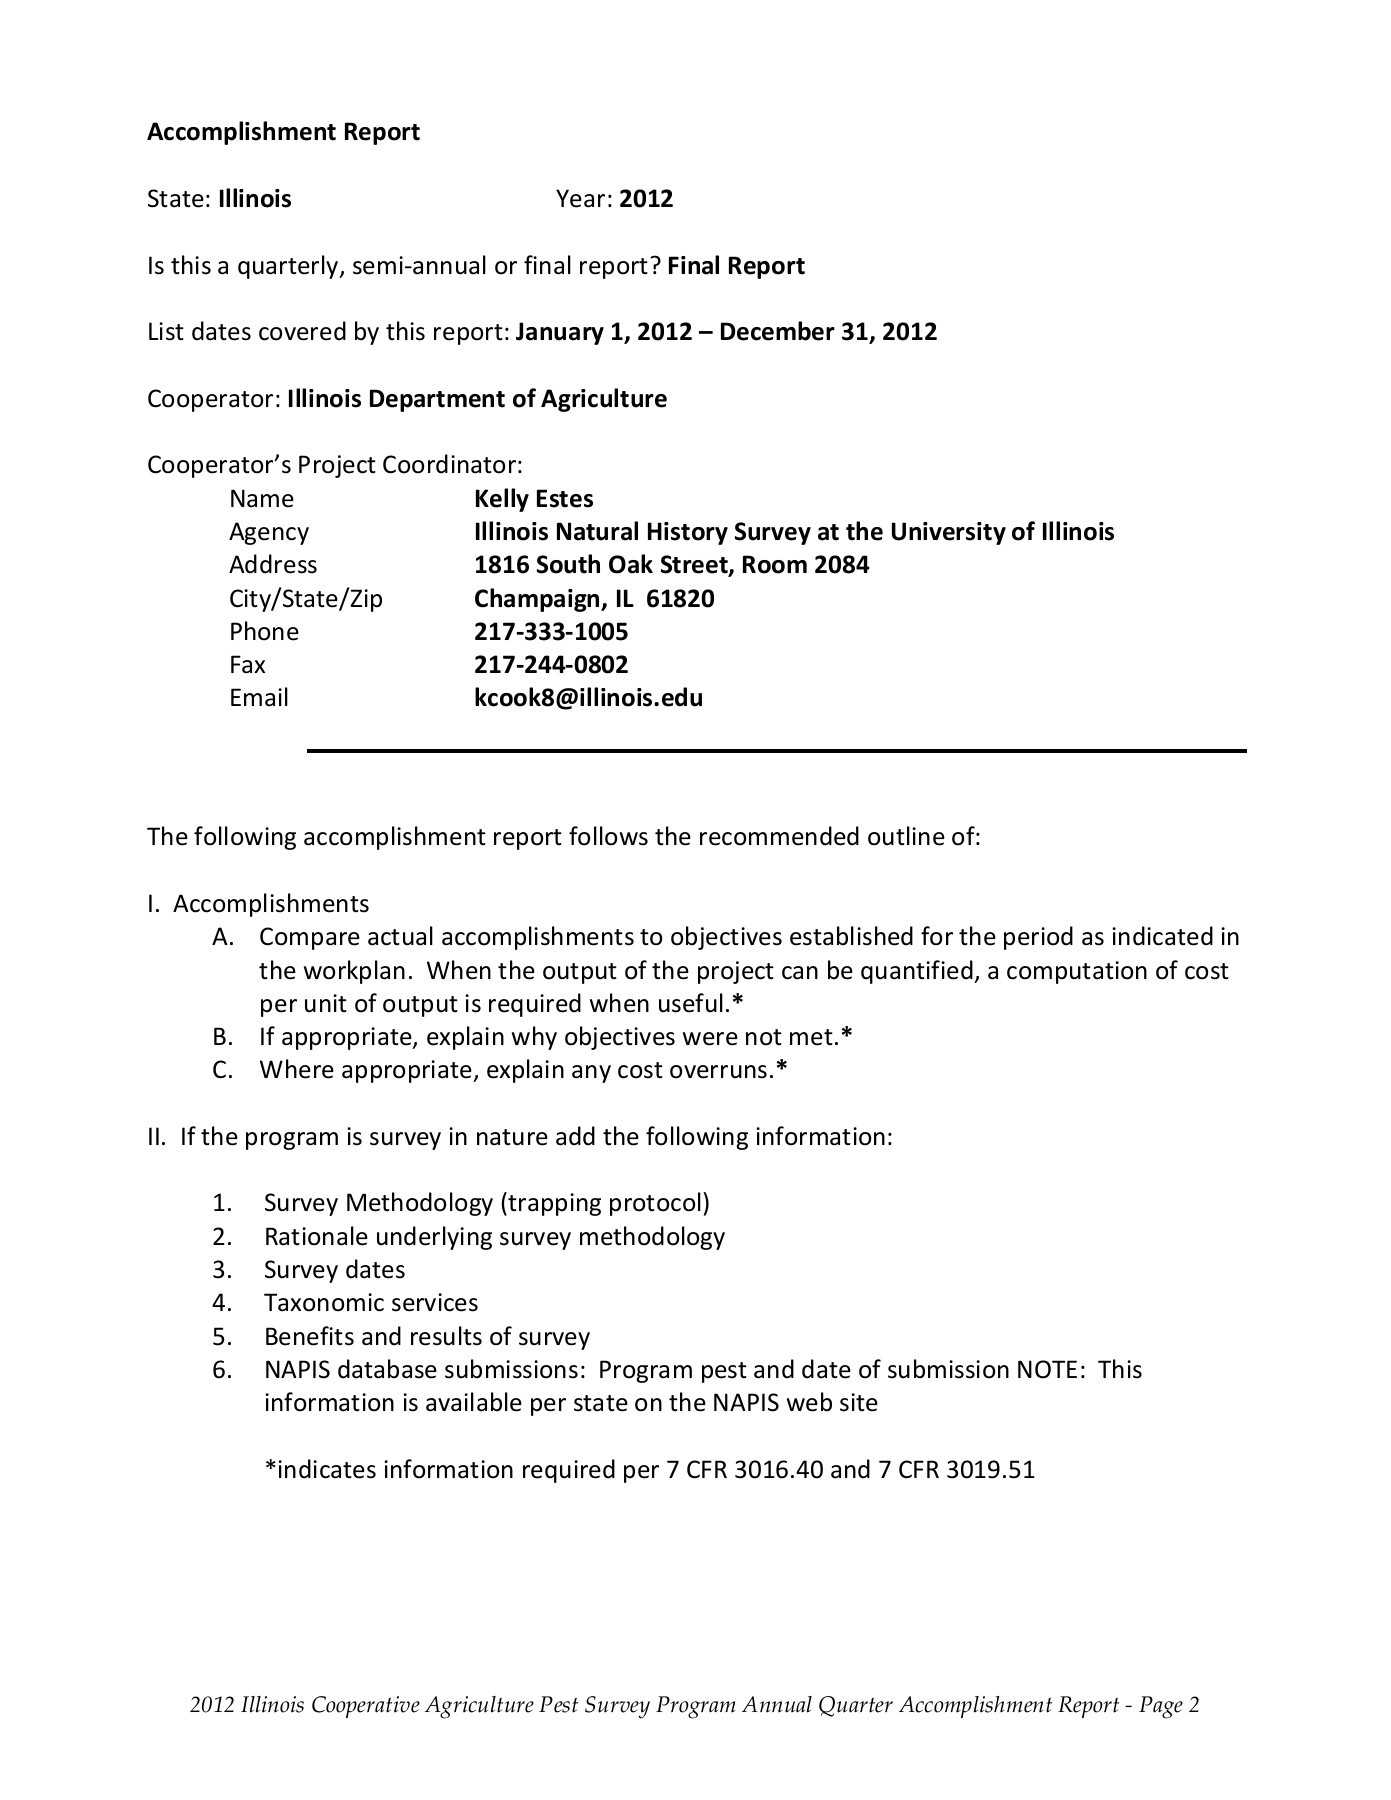 Accomplishment Report Format – Illinois Natural History Survy Throughout Weekly Accomplishment Report Template